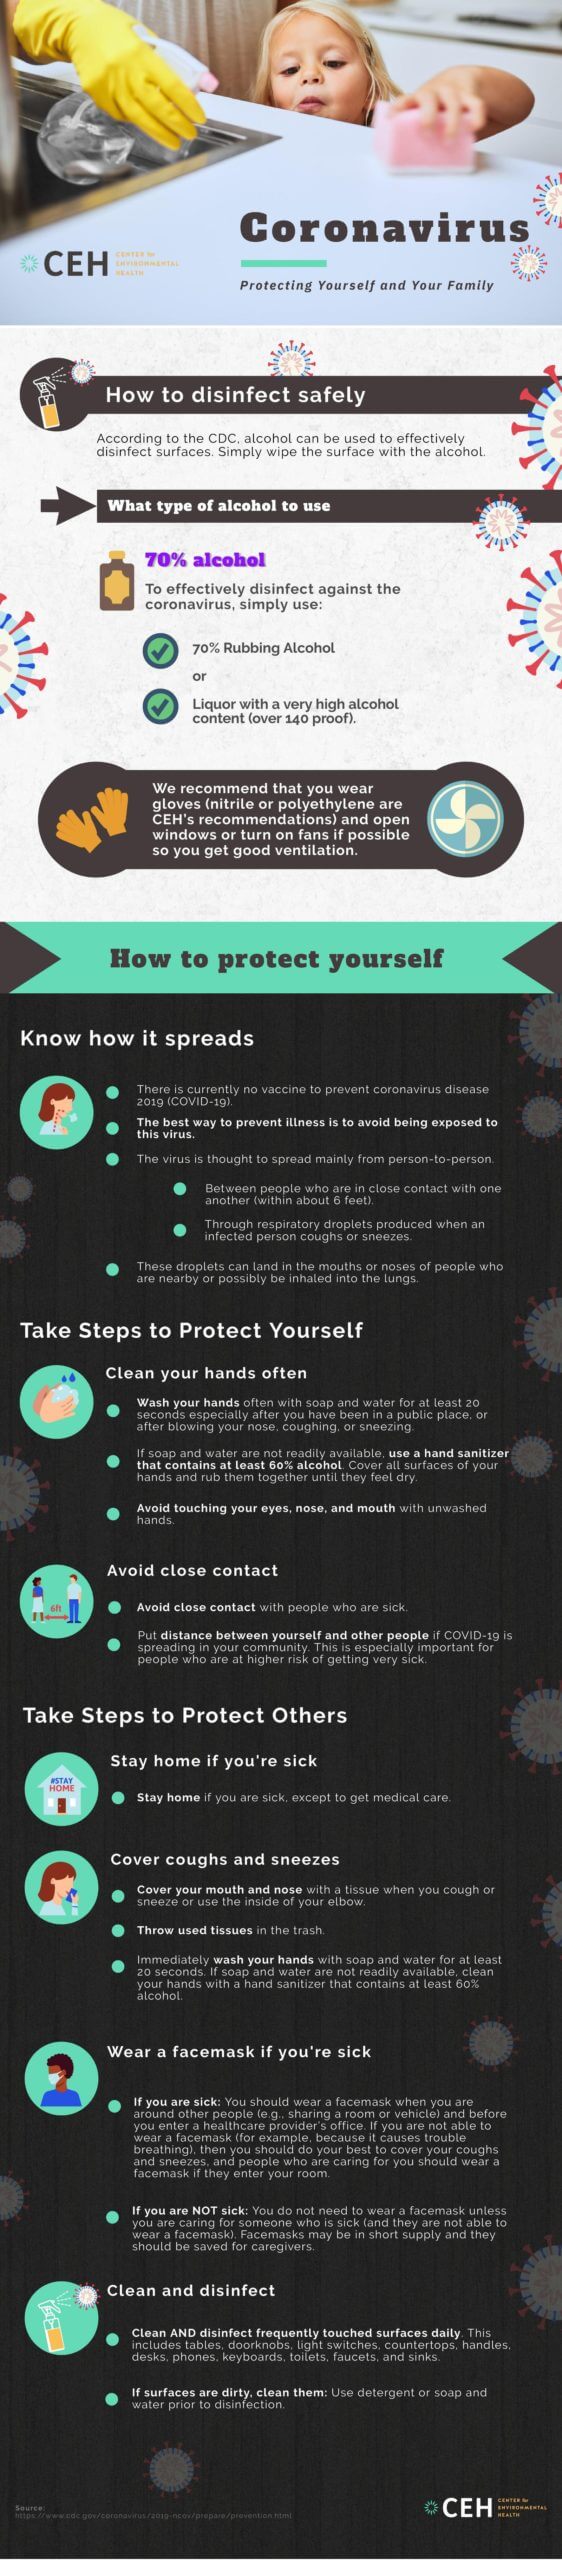 Tips To Protect Yourself From The Coronavirus And Chemical Toxins